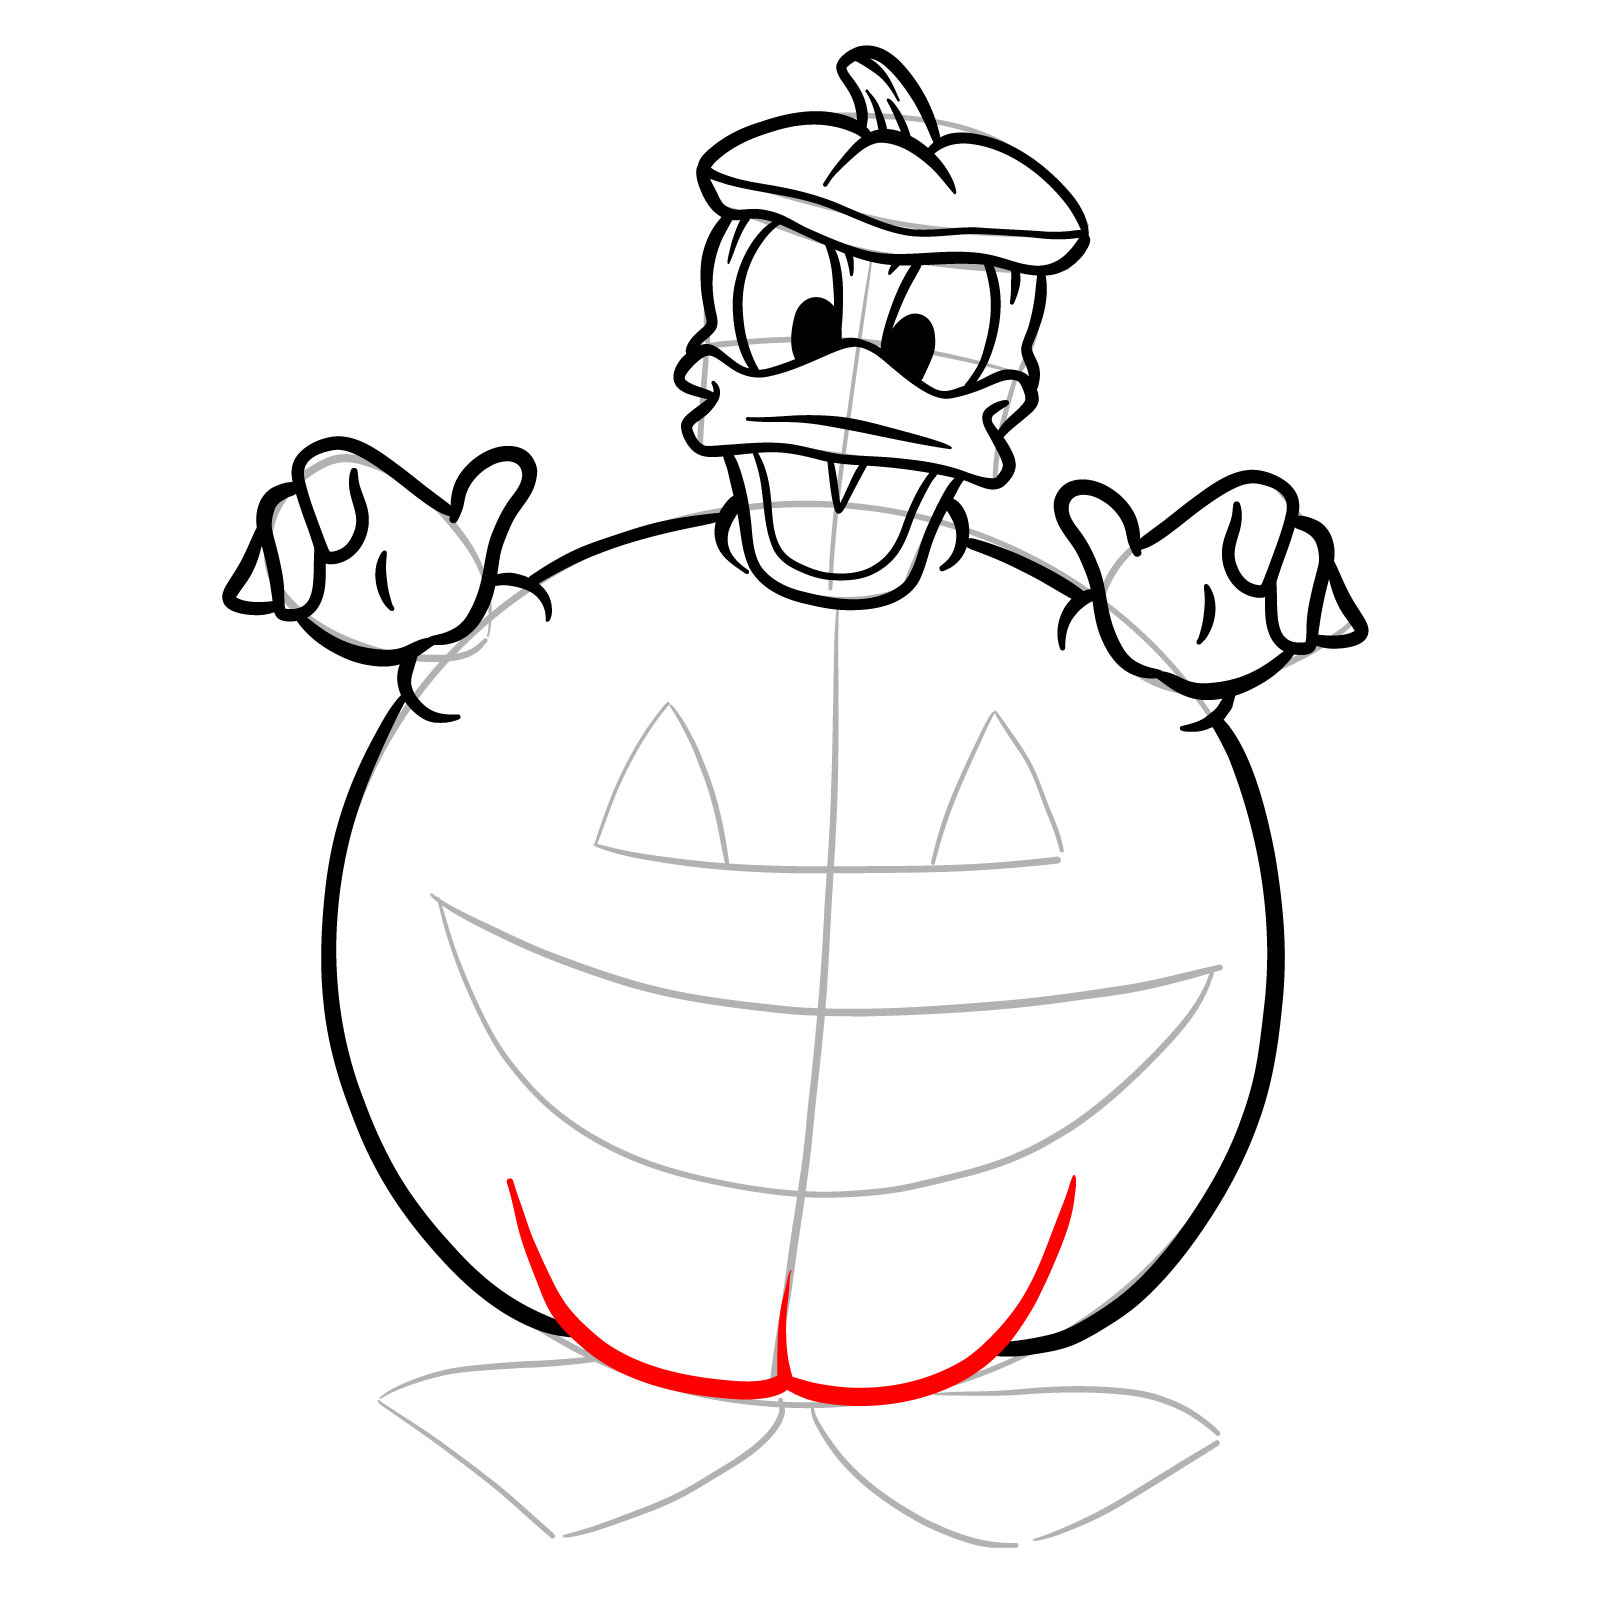 How to draw Halloween Donald Duck in a jack o'lantern - step 18